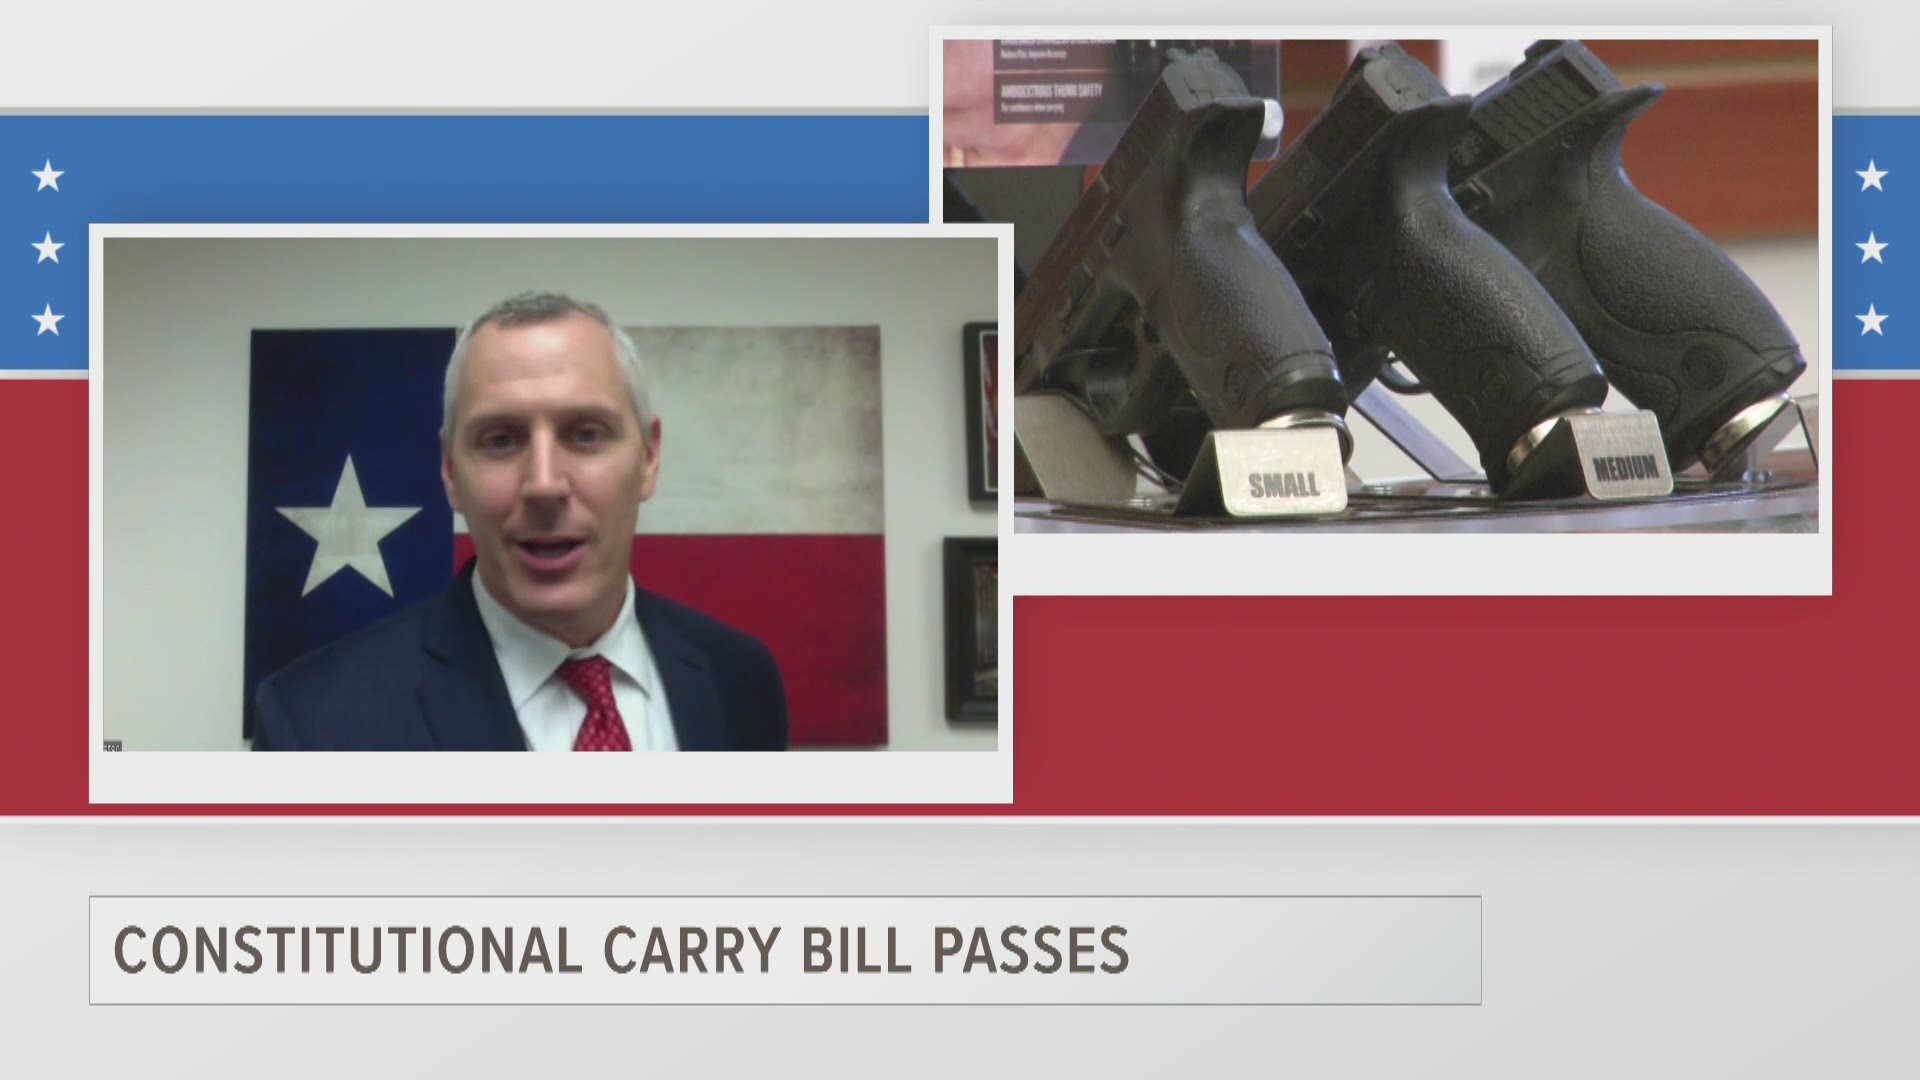 State Rep. Matt Schaefer (R-Tyler) discusses the final version of House Bill 1927, which passed through the legislature and awaits Gov. Abbott's signature